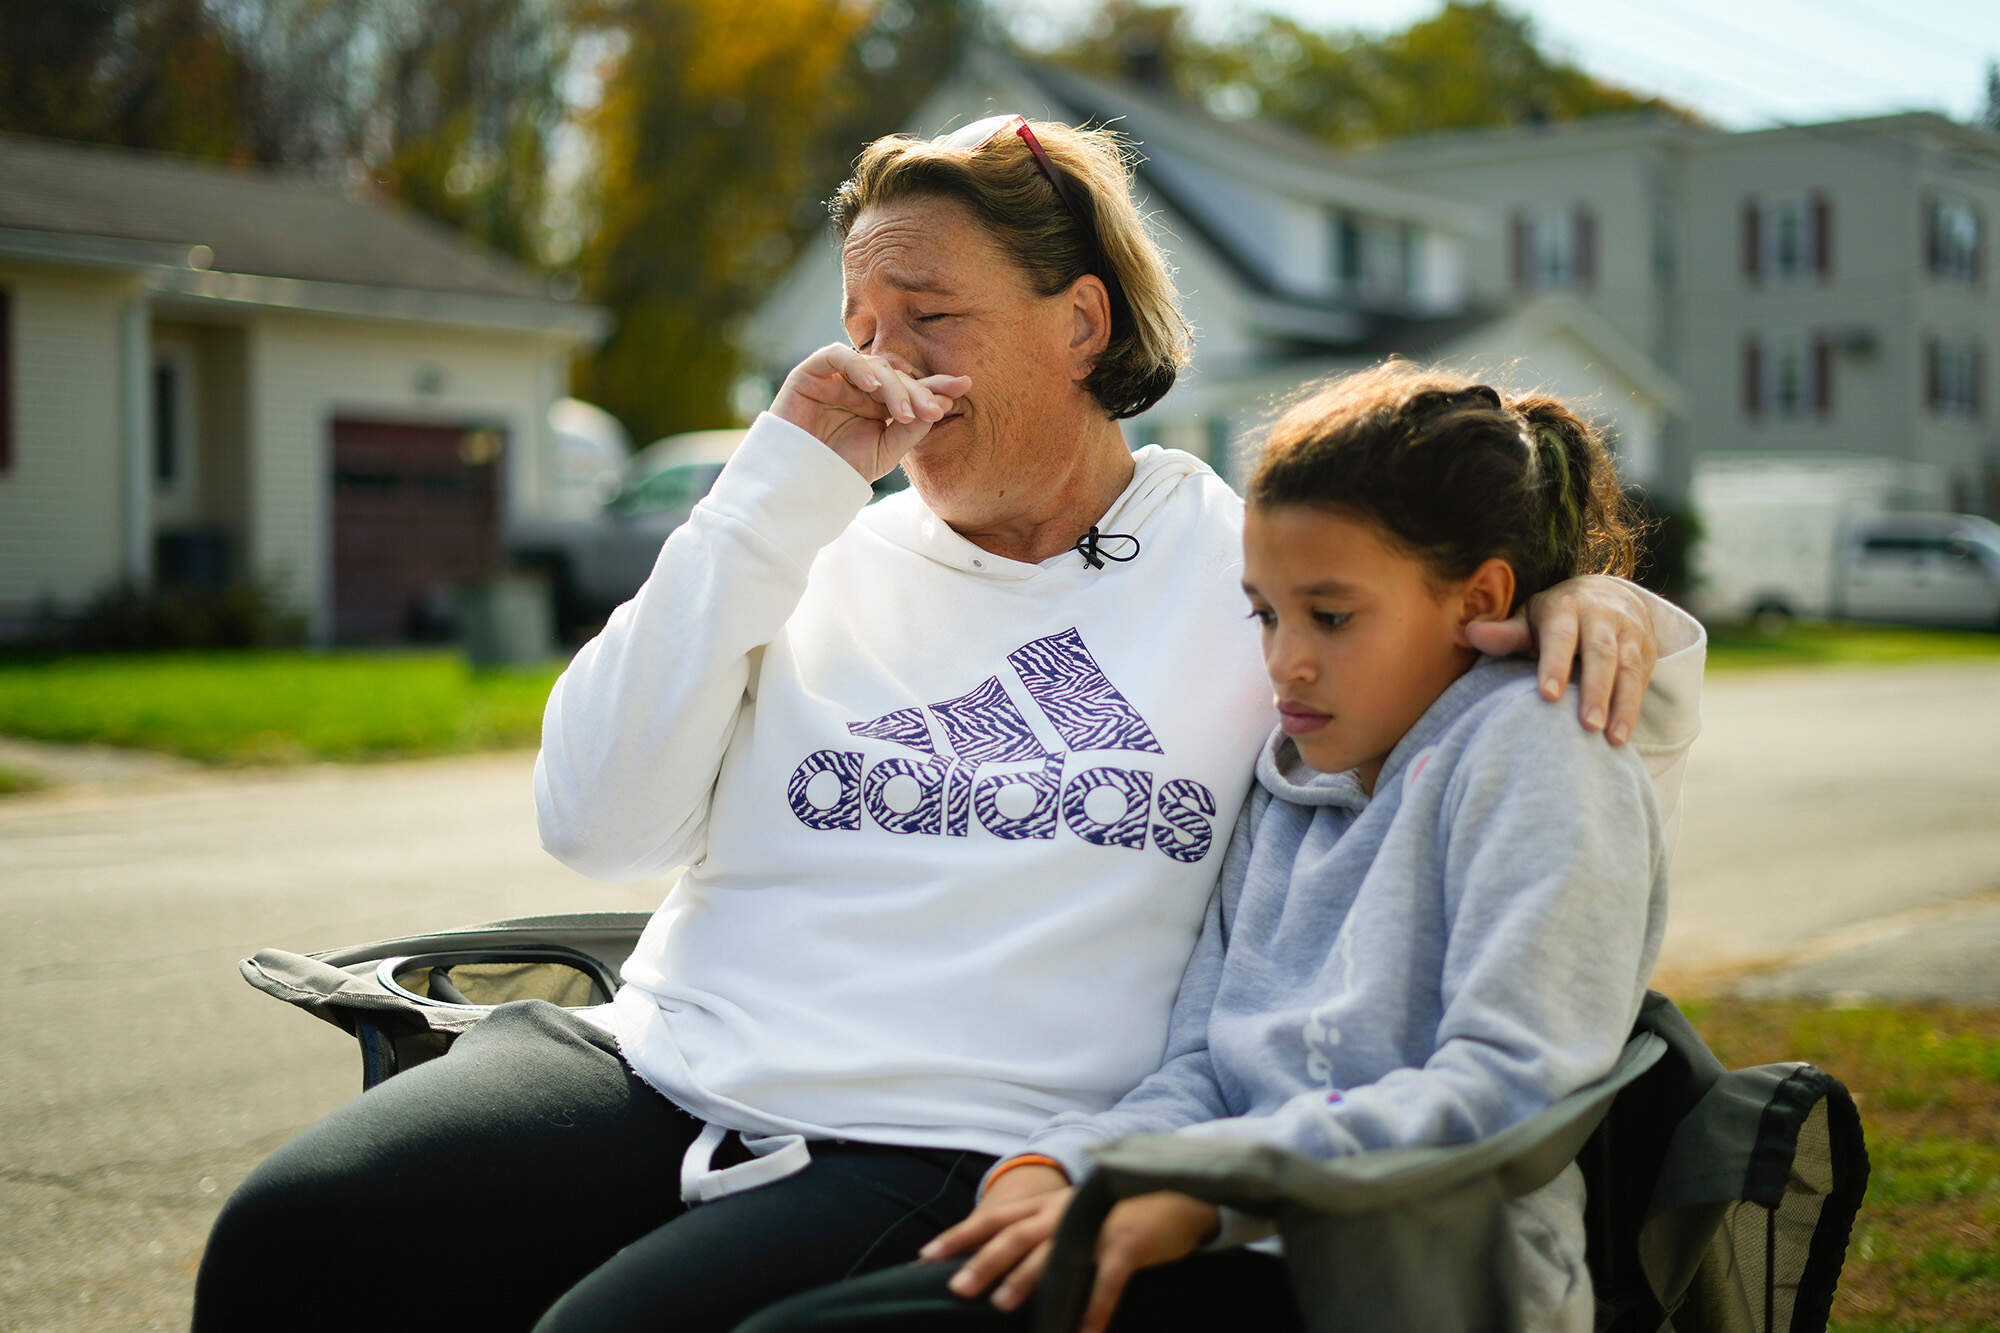 Tammy Asselin, who was at the Schemengees Bar and Grille with her daughter, Toni, during the recent mass shooting, wipes her face during an interview in Lewiston, Maine on Friday. (Matt Rourke/AP)